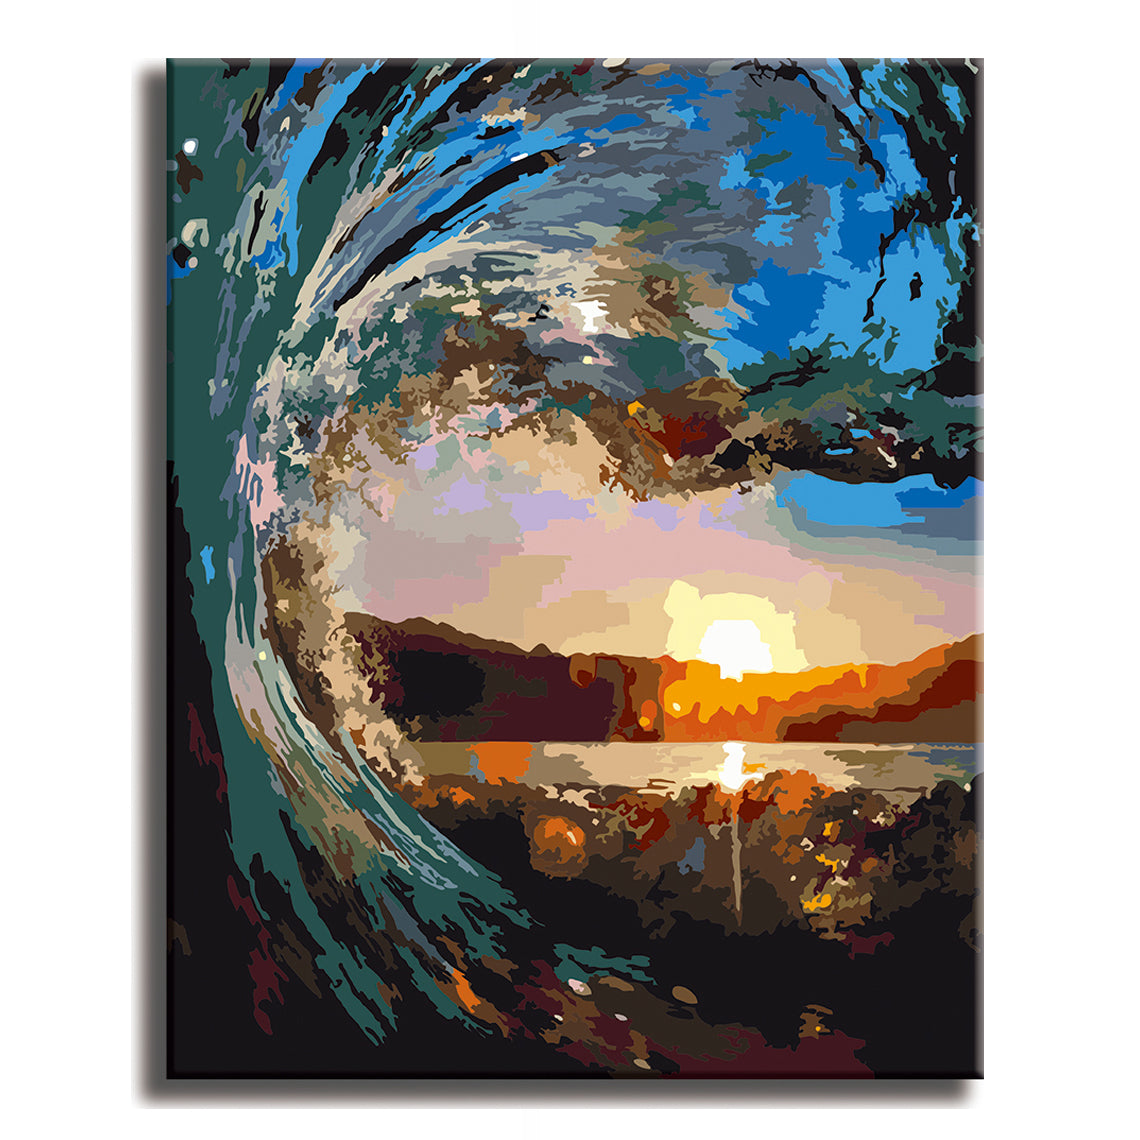 Sunrise Waves - Paint by Numbers Kit for Adults DIY Oil Painting Kit on Canvas